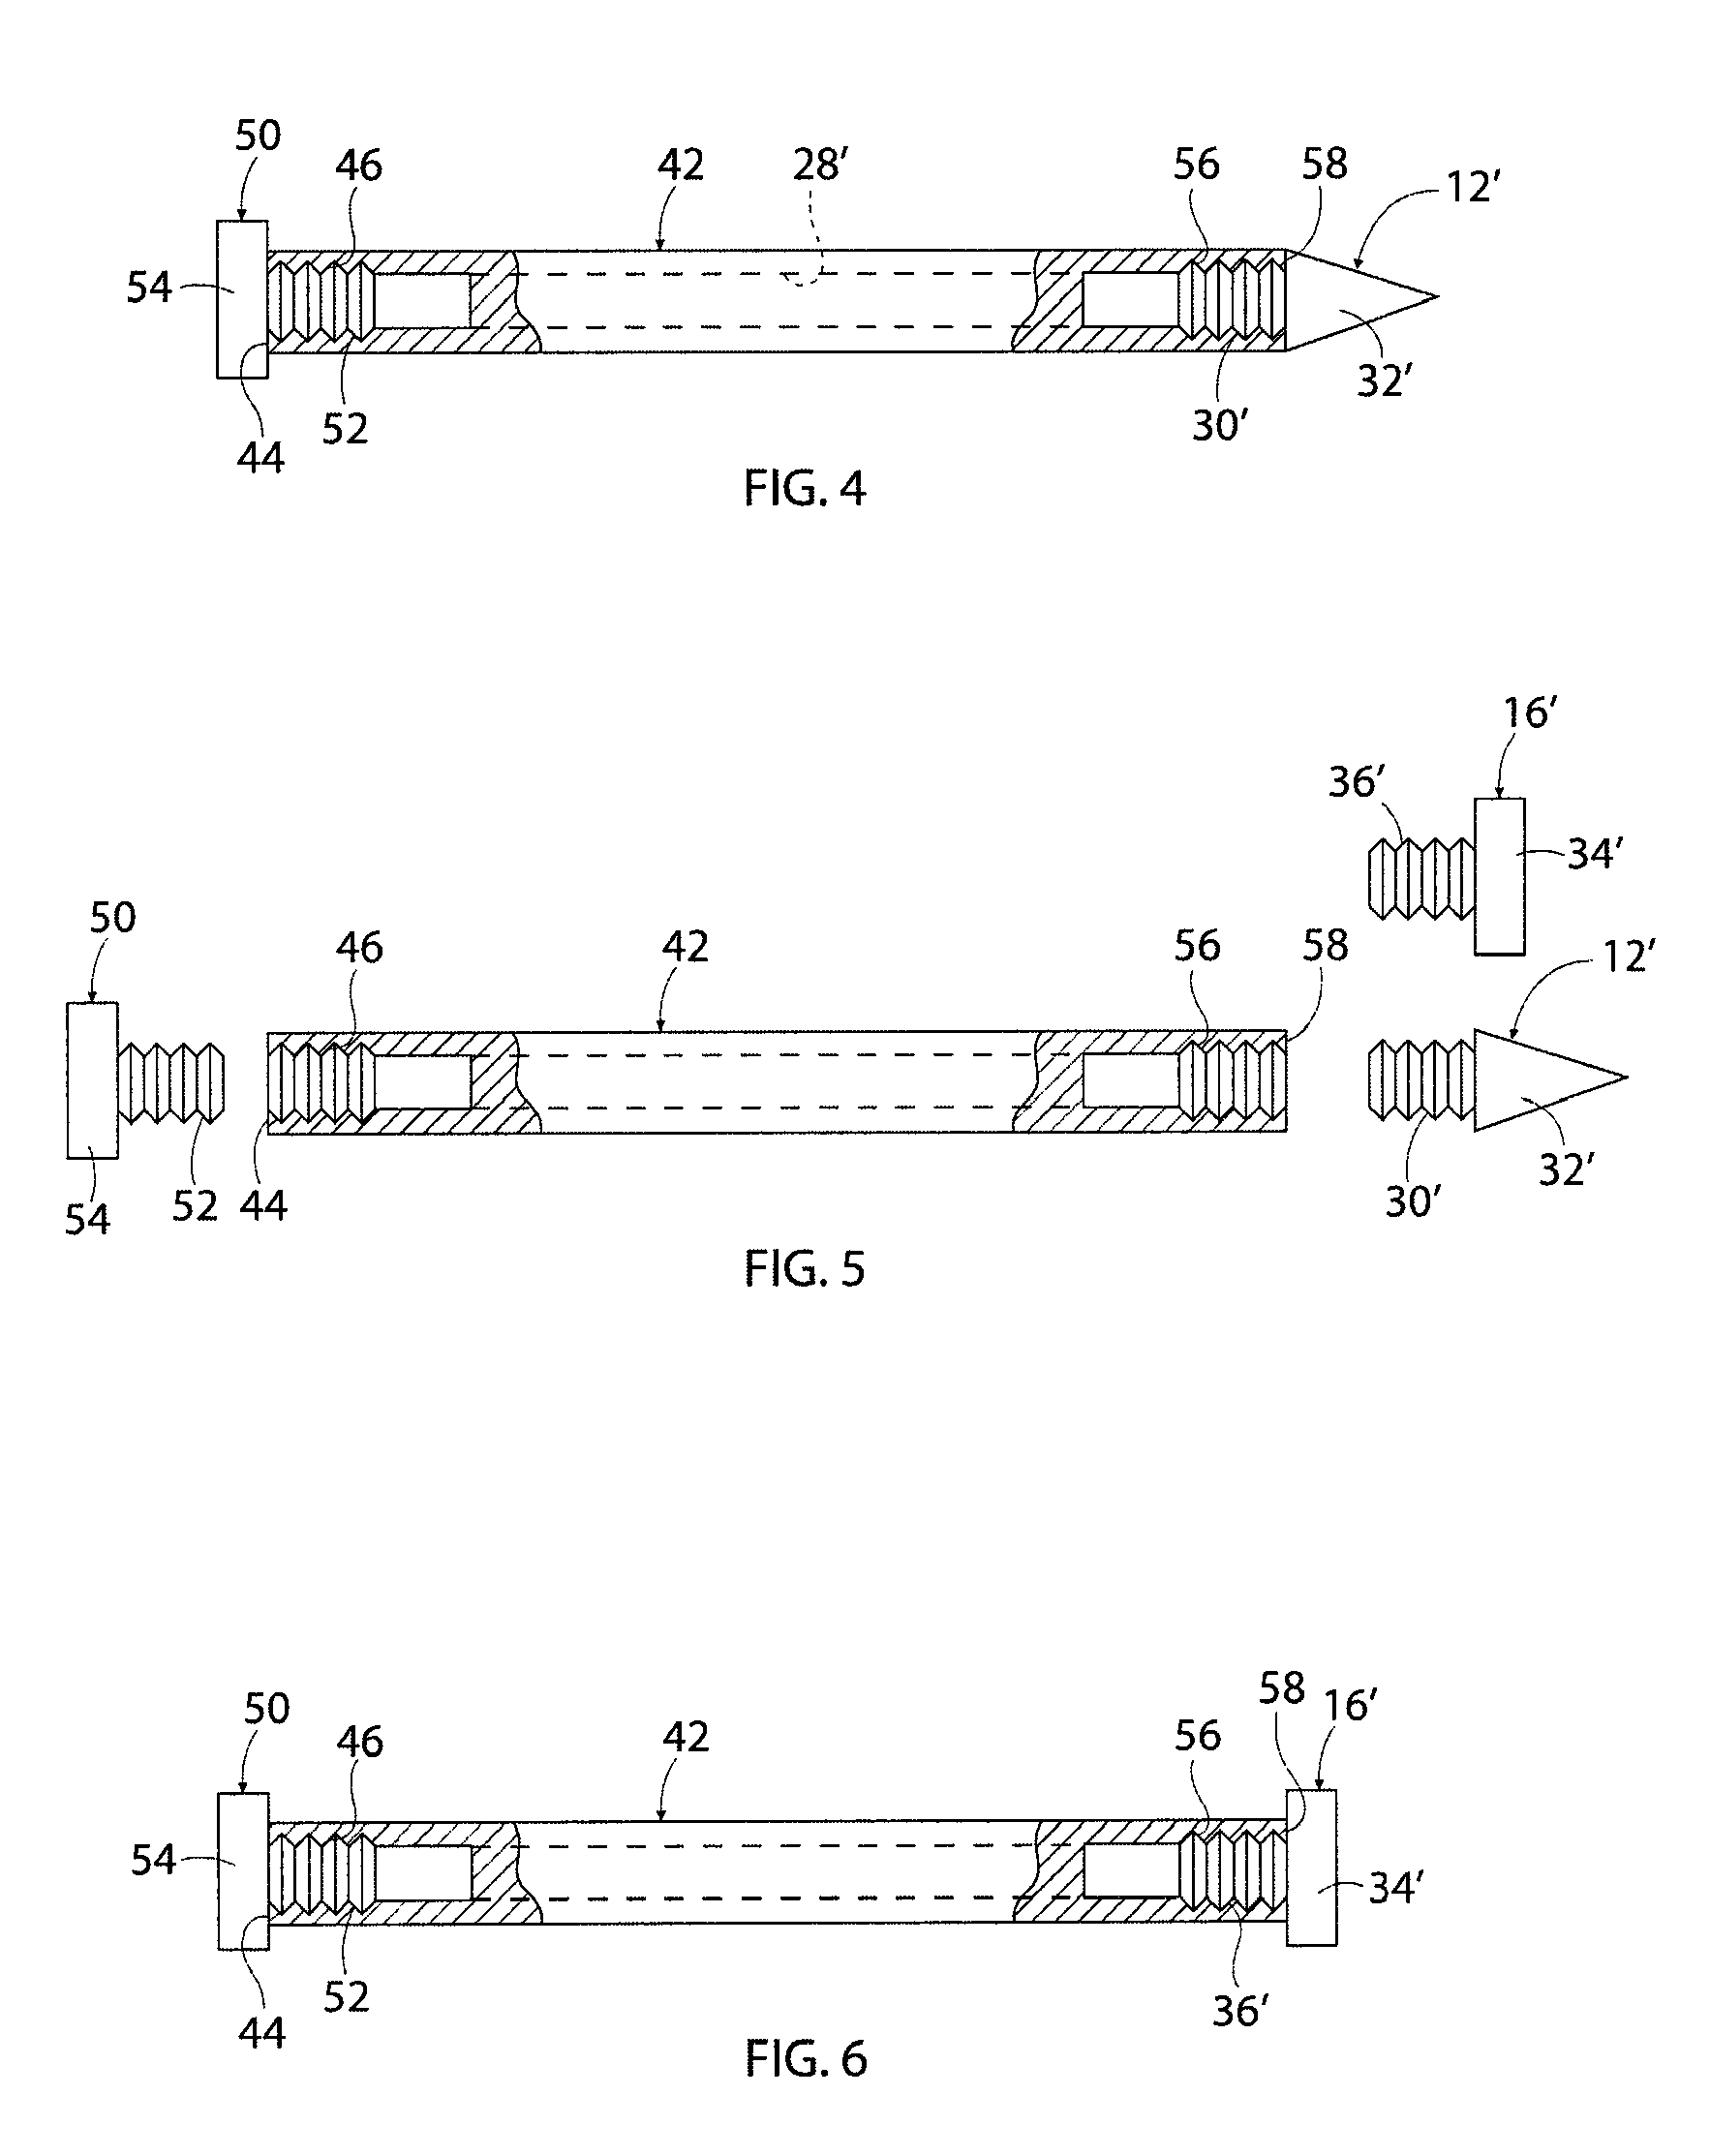 Bone bolt assembly for attaching supporting implants to bones, for holding multiple bones in relative positions, and for holding together fractured bone fragments